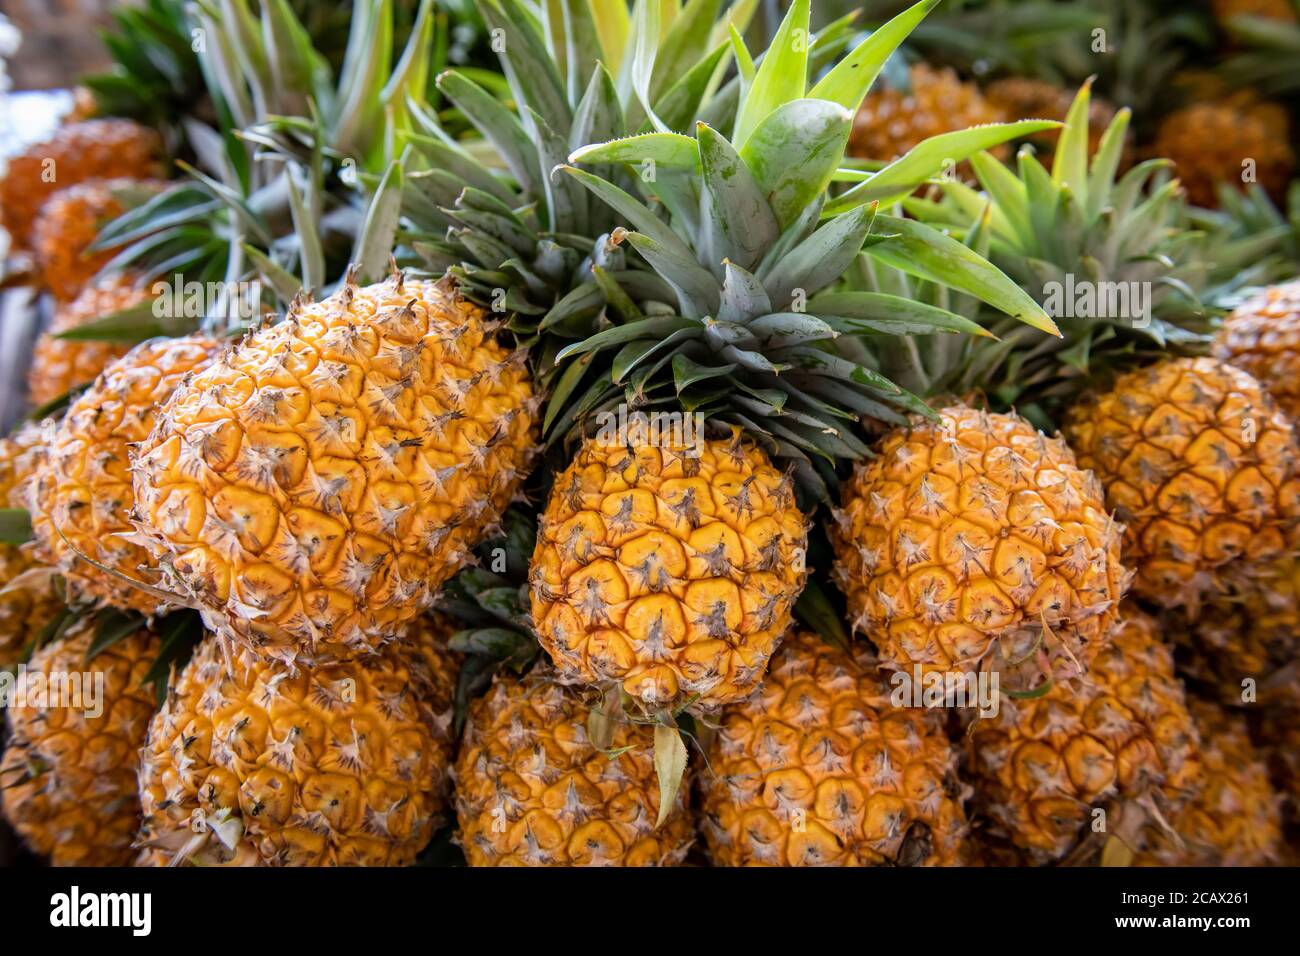 Fresh Pineapple (Ananas comosus) for sale at local market in Riviera Nayarit, Mexico Stock Photo